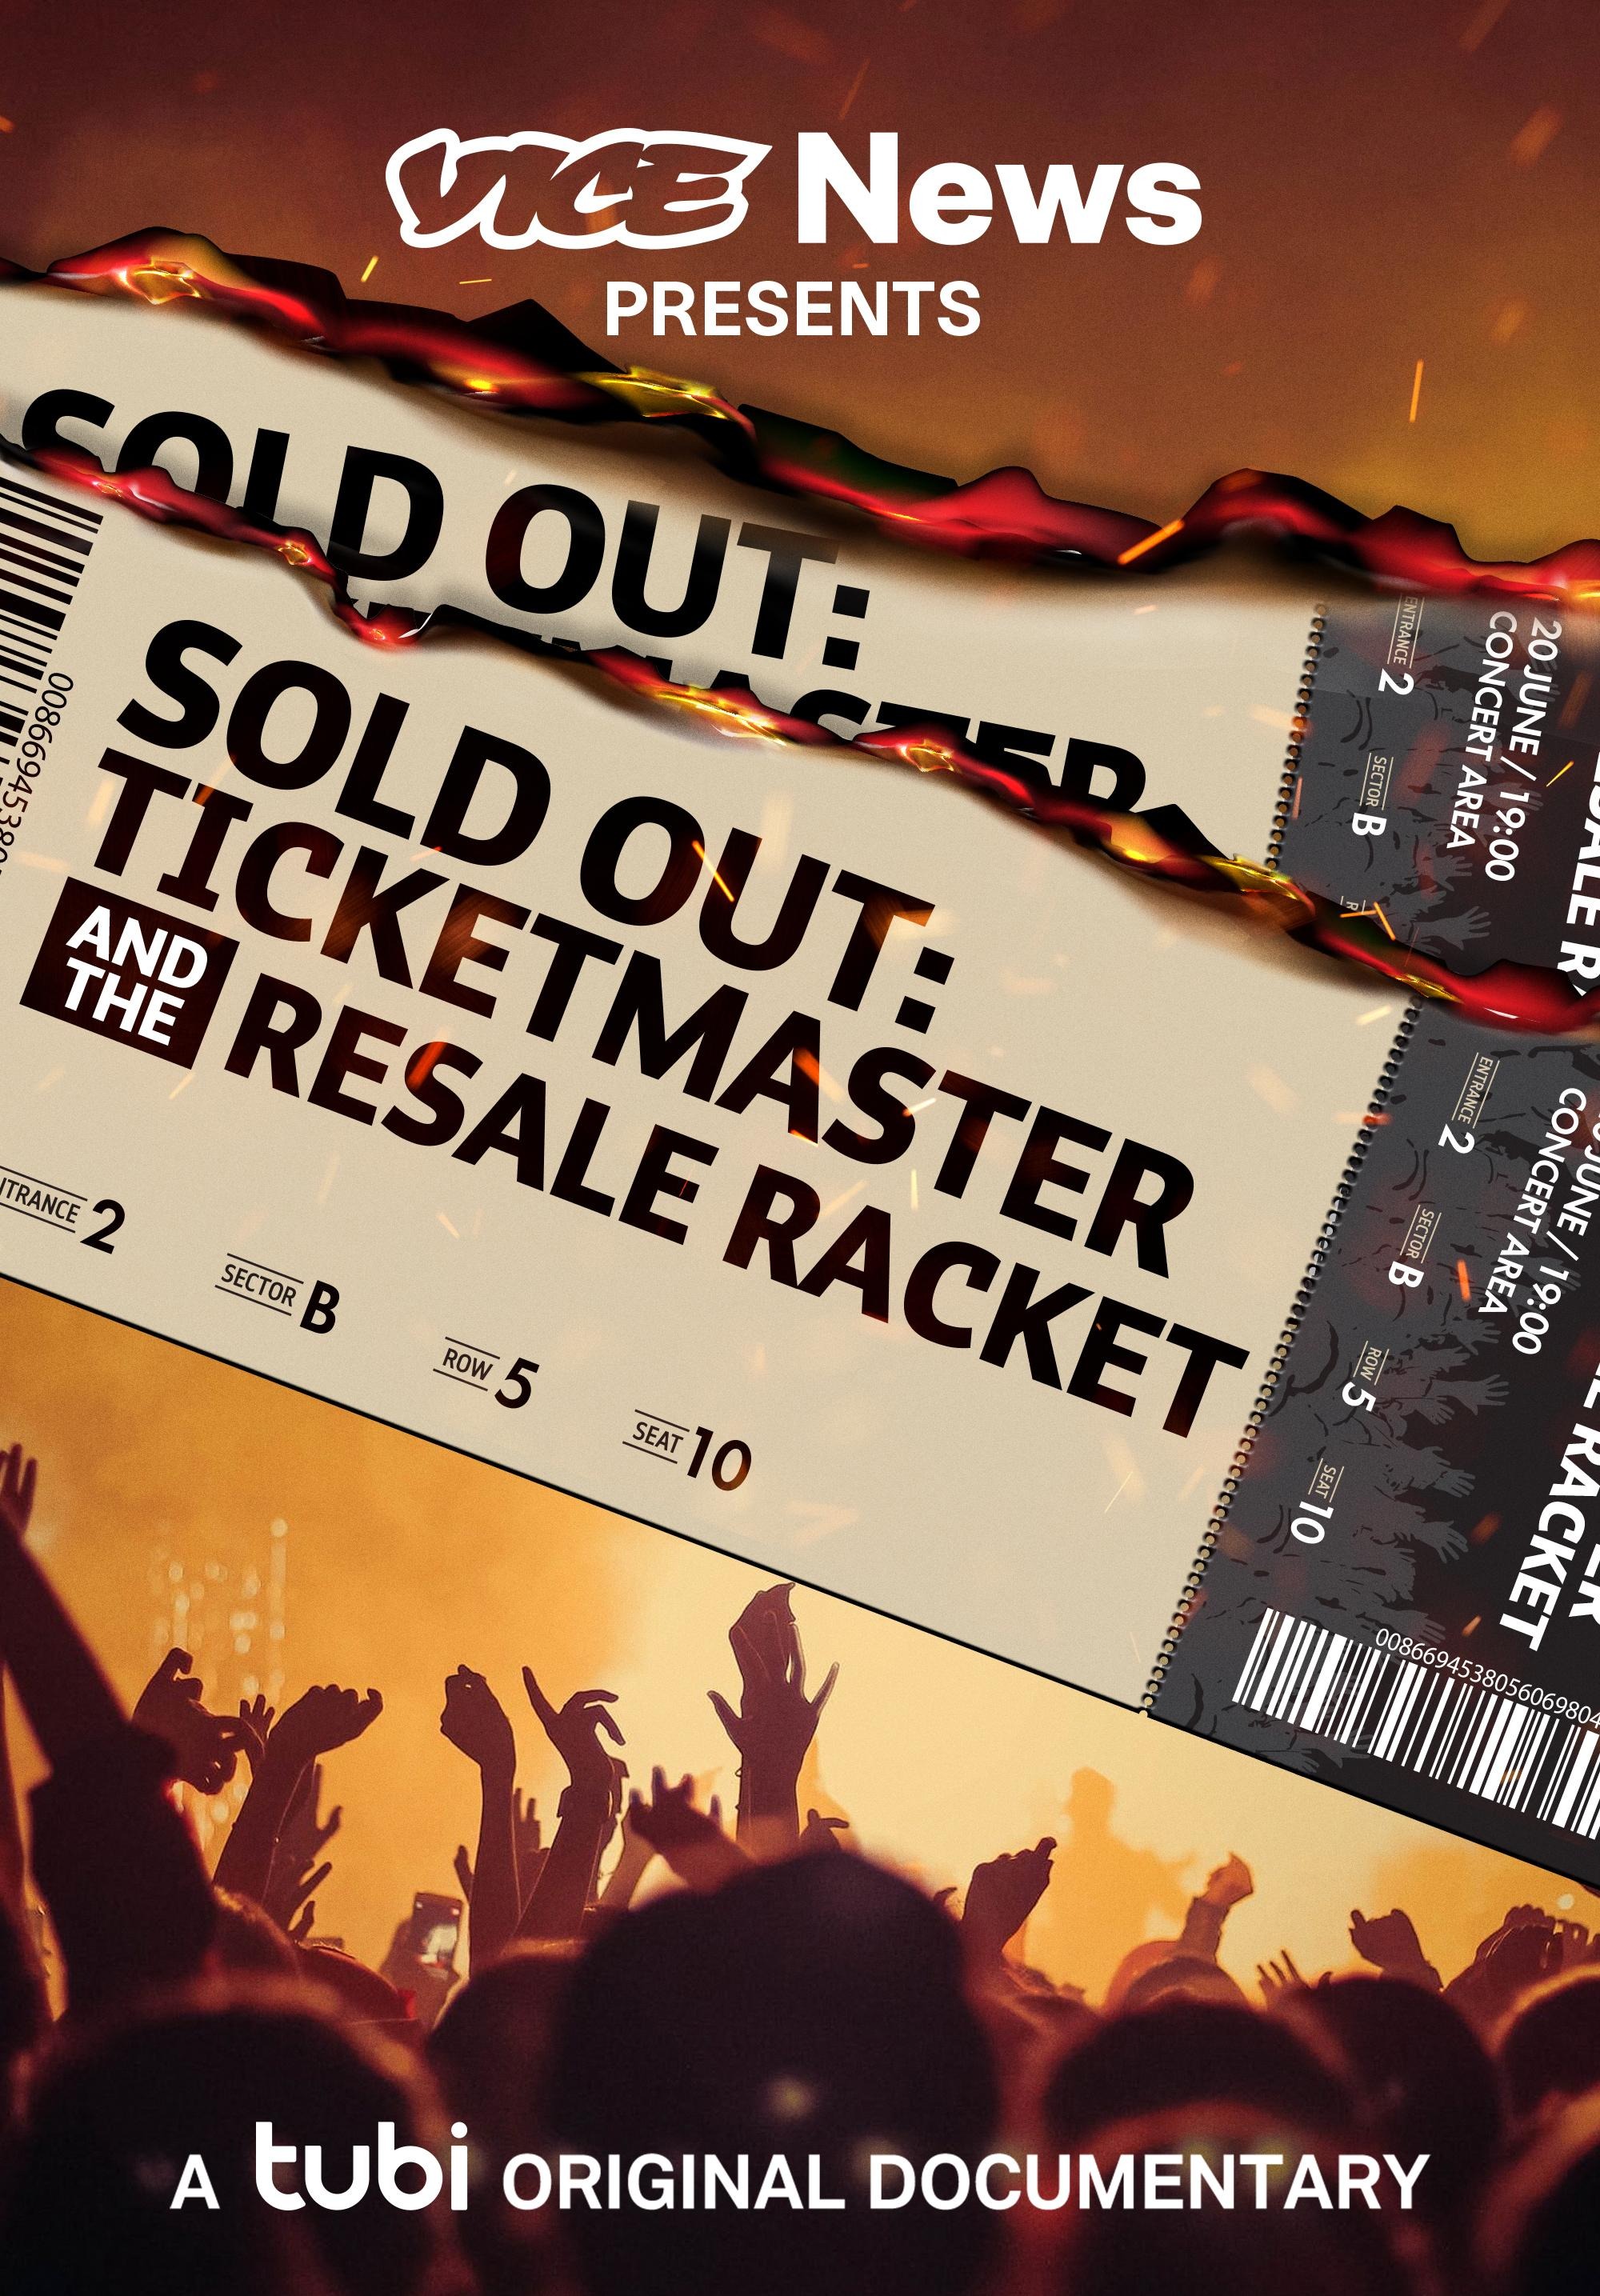 Mega Sized Movie Poster Image for VICE News Presents - Sold Out: Ticketmaster and the Resale Racket 